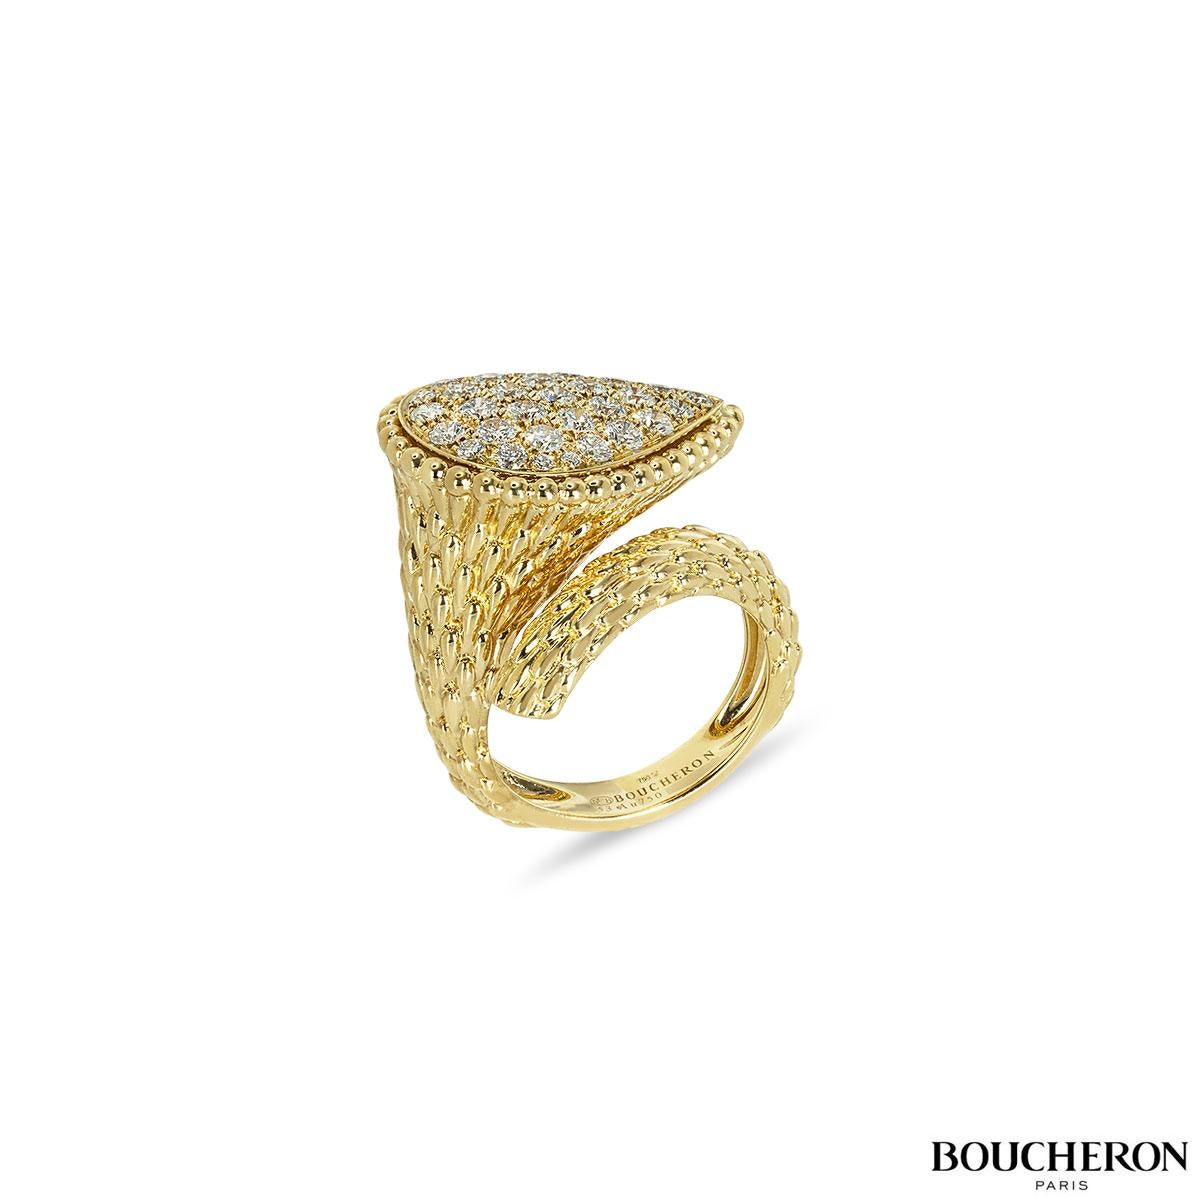 A stunning 18k yellow gold Boucheron from the Serpent Bohème collection. The ring comprises of a textured ring leading up to a large tear drop motif with beading around the outer edge. There are 32 round brilliant cut diamonds with a total weight of